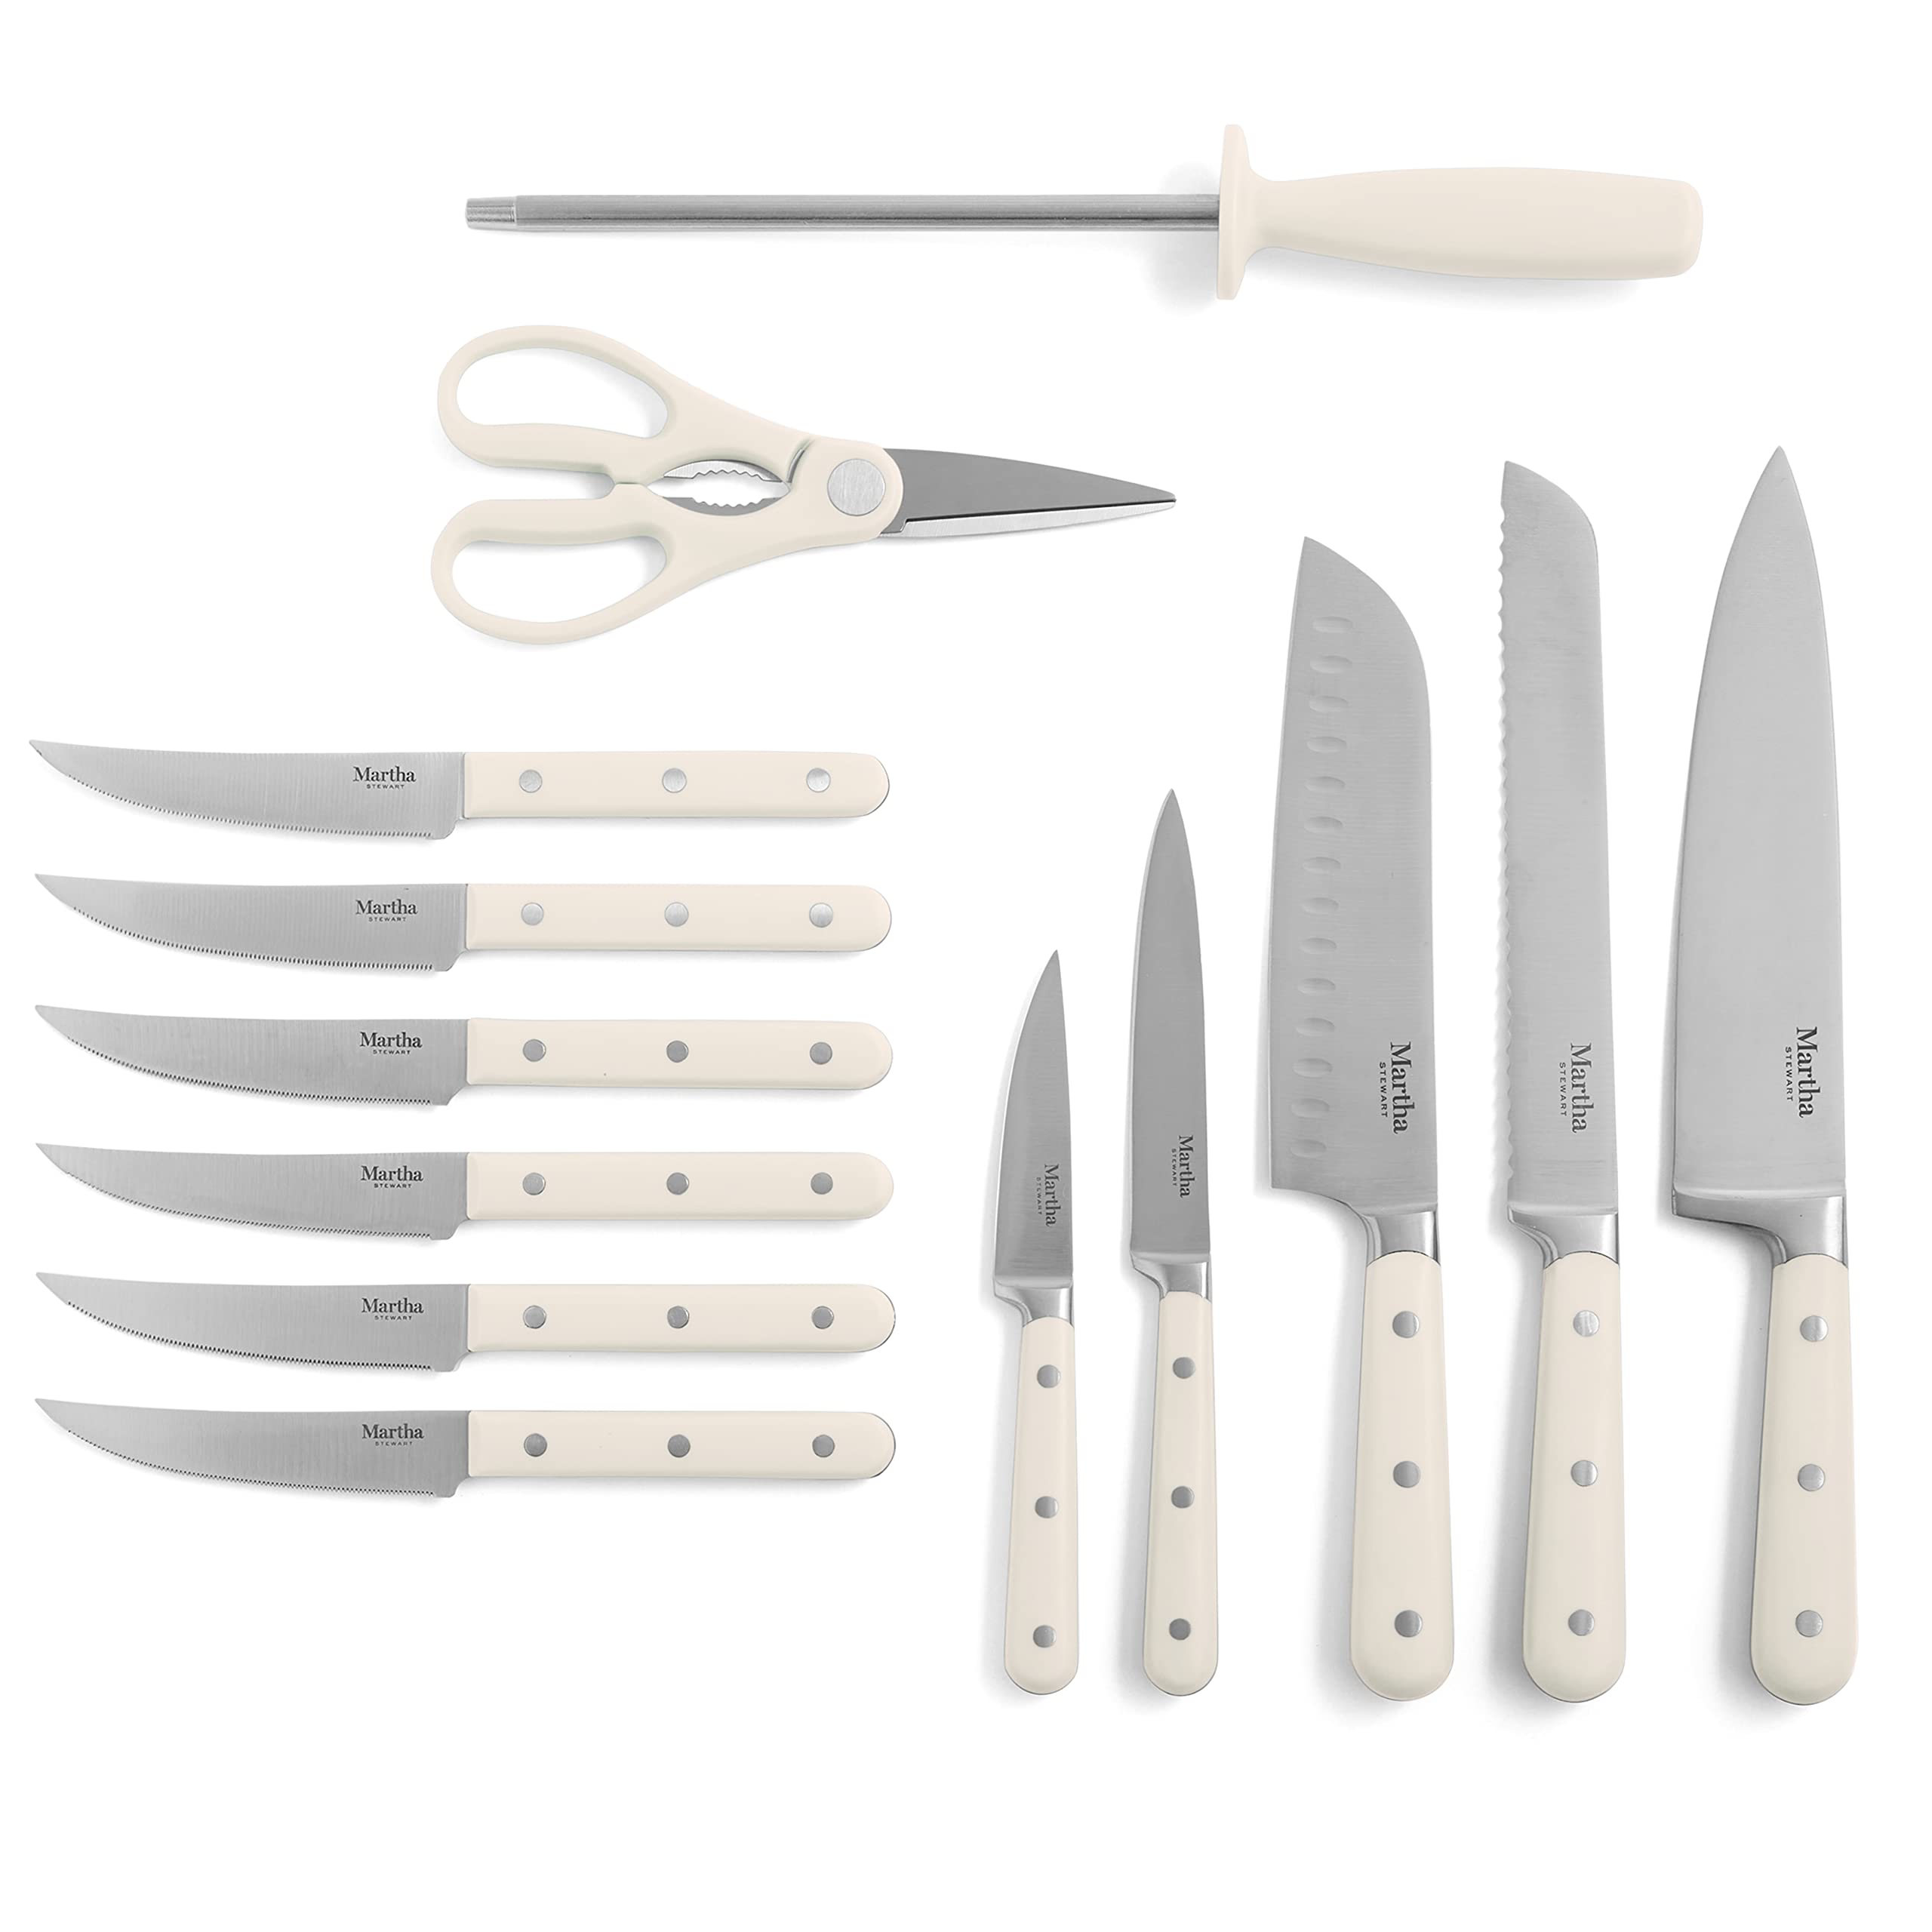 MARTHA STEWART Eastwalk 14 Piece High Carbon Stainless Steel Cutlery Knife Block Set w/ABS Triple Riveted Forged Handle Acacia Wood Block - Linen White